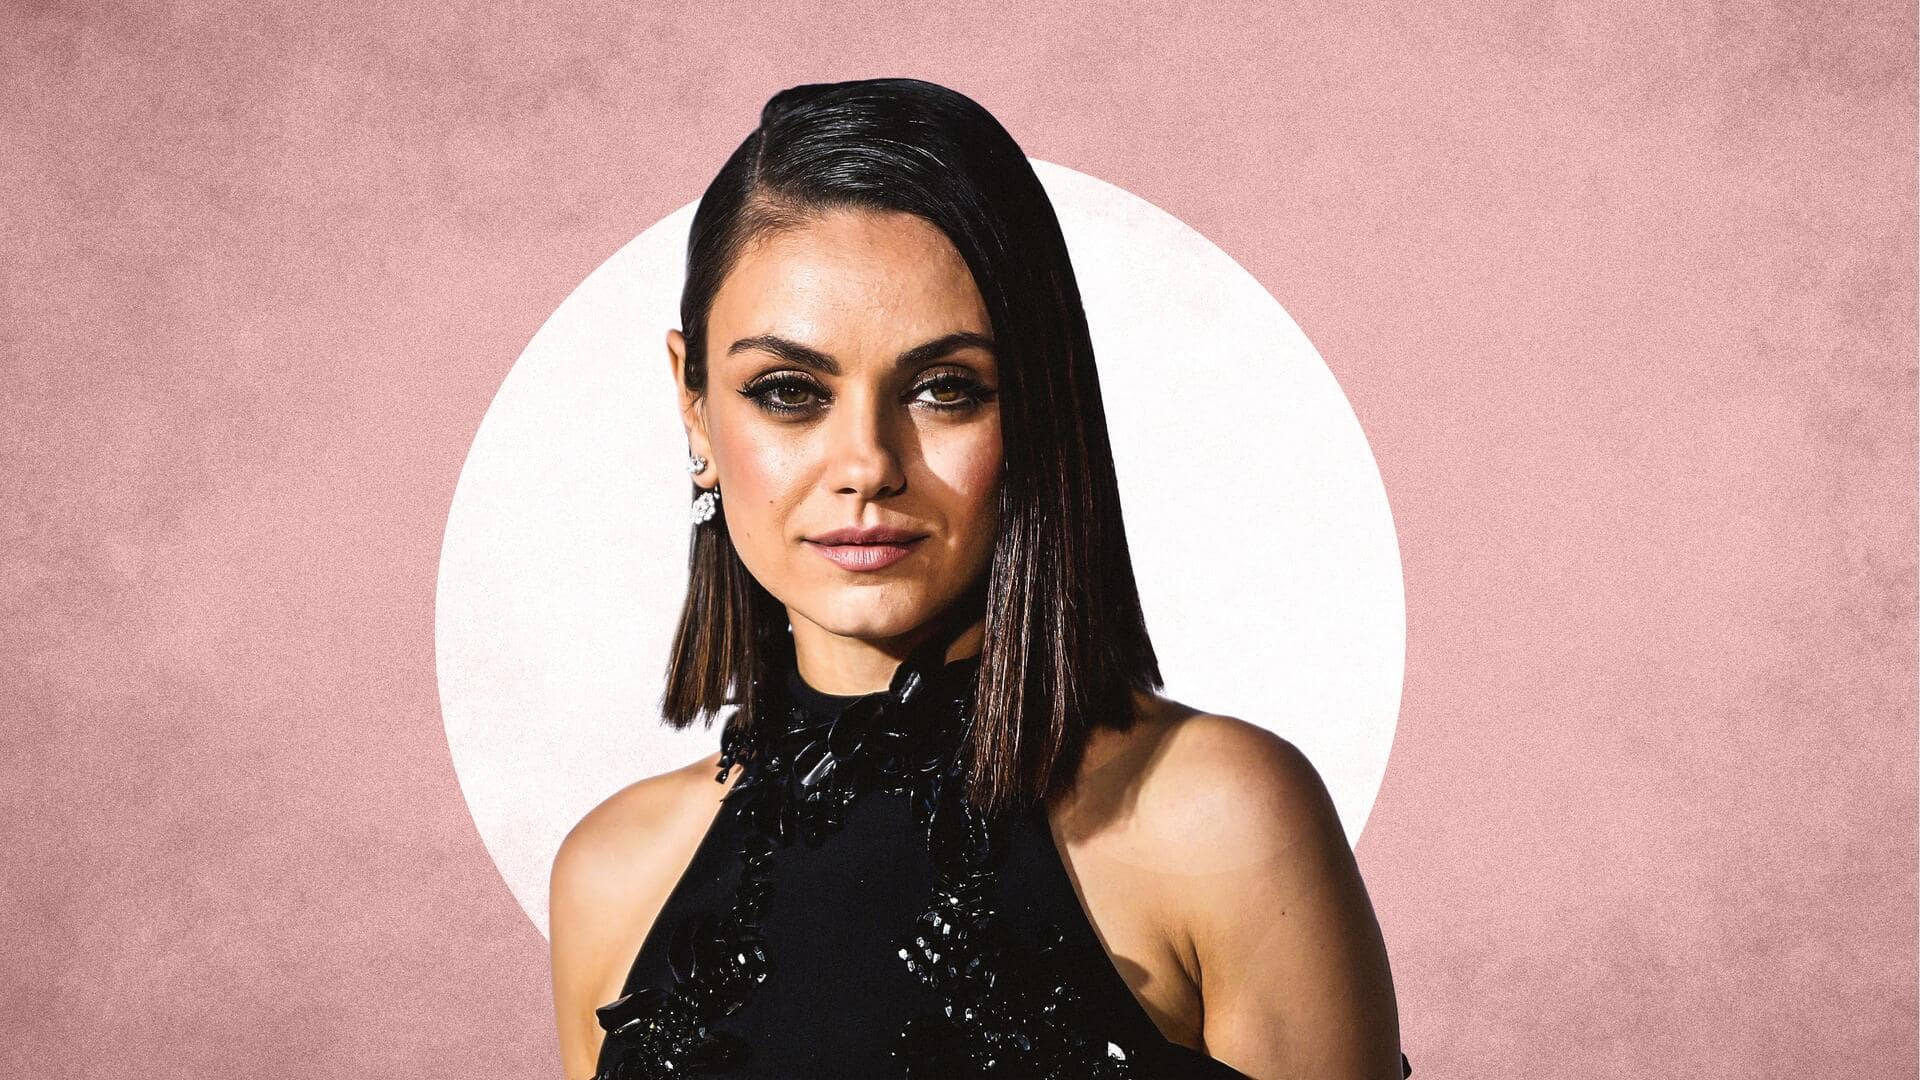 Happy birthday, Mila Kunis: Looking at actor's most unforgettable performances